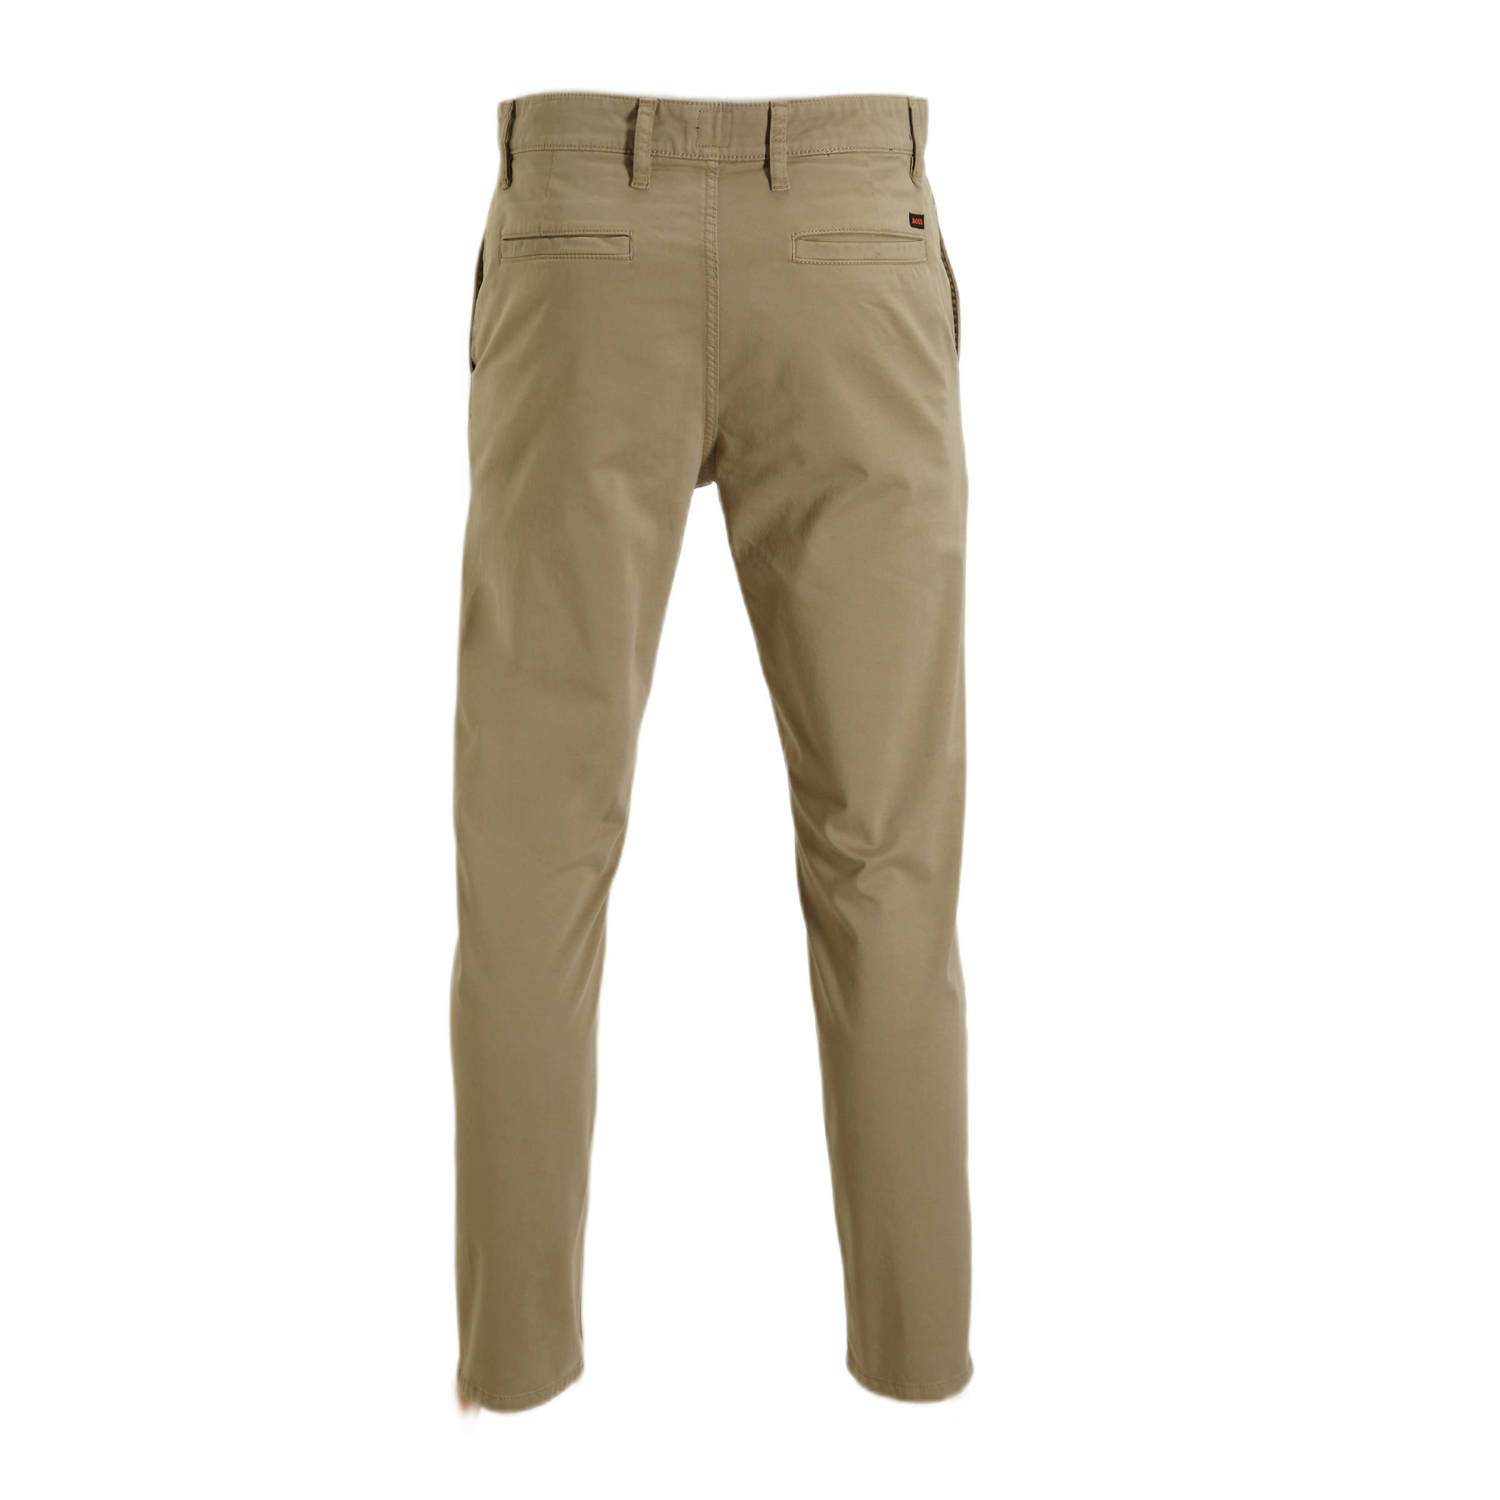 BOSS tapered fit chino light pastel brown